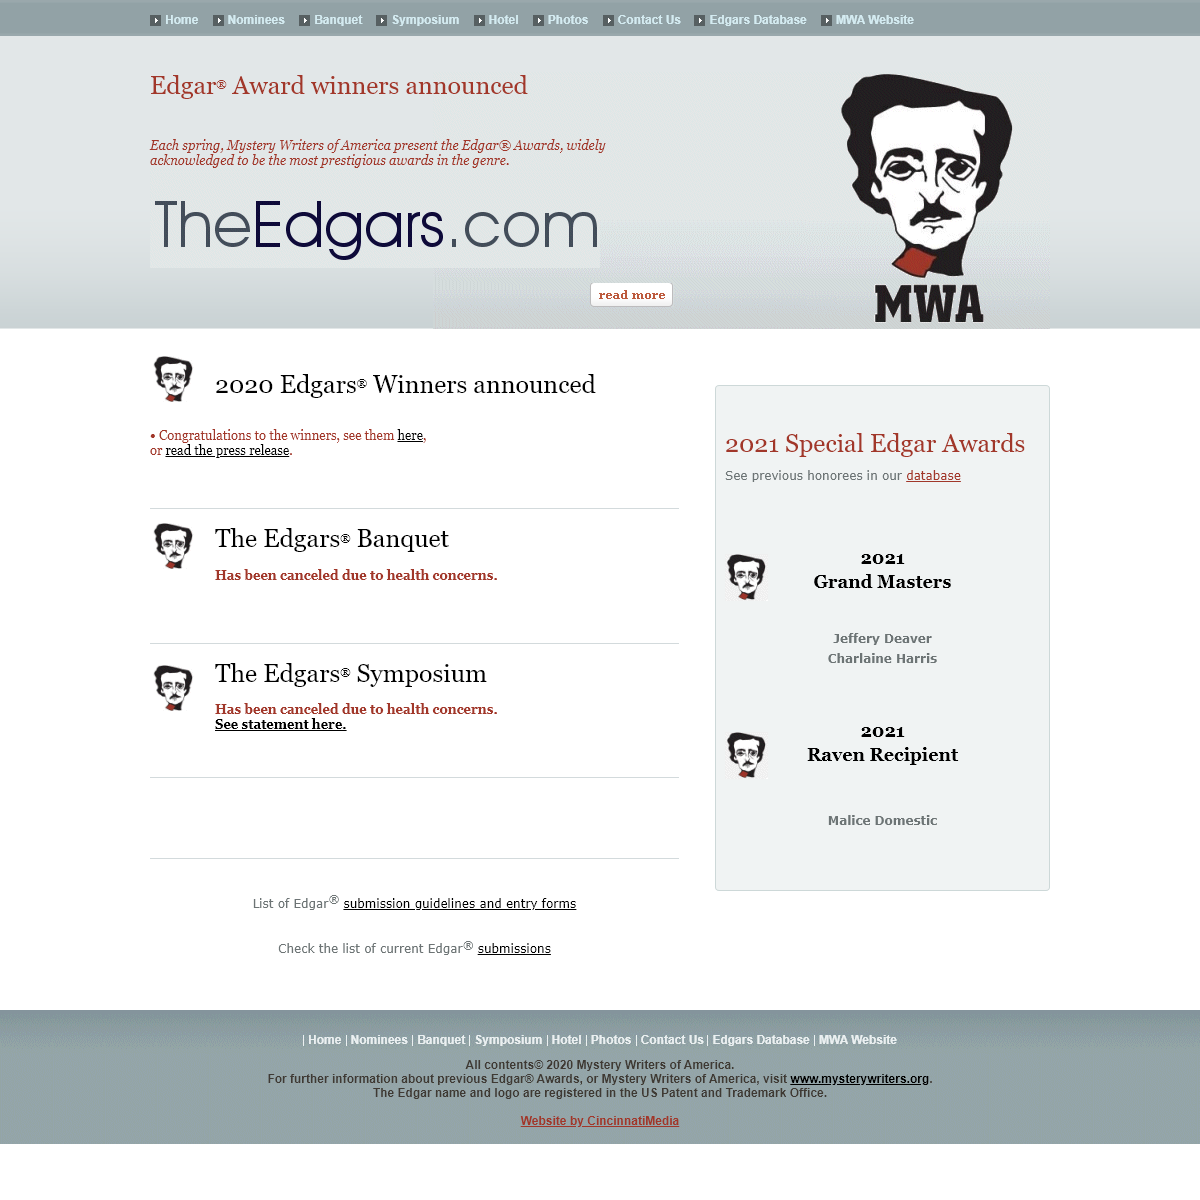 A complete backup of theedgars.com